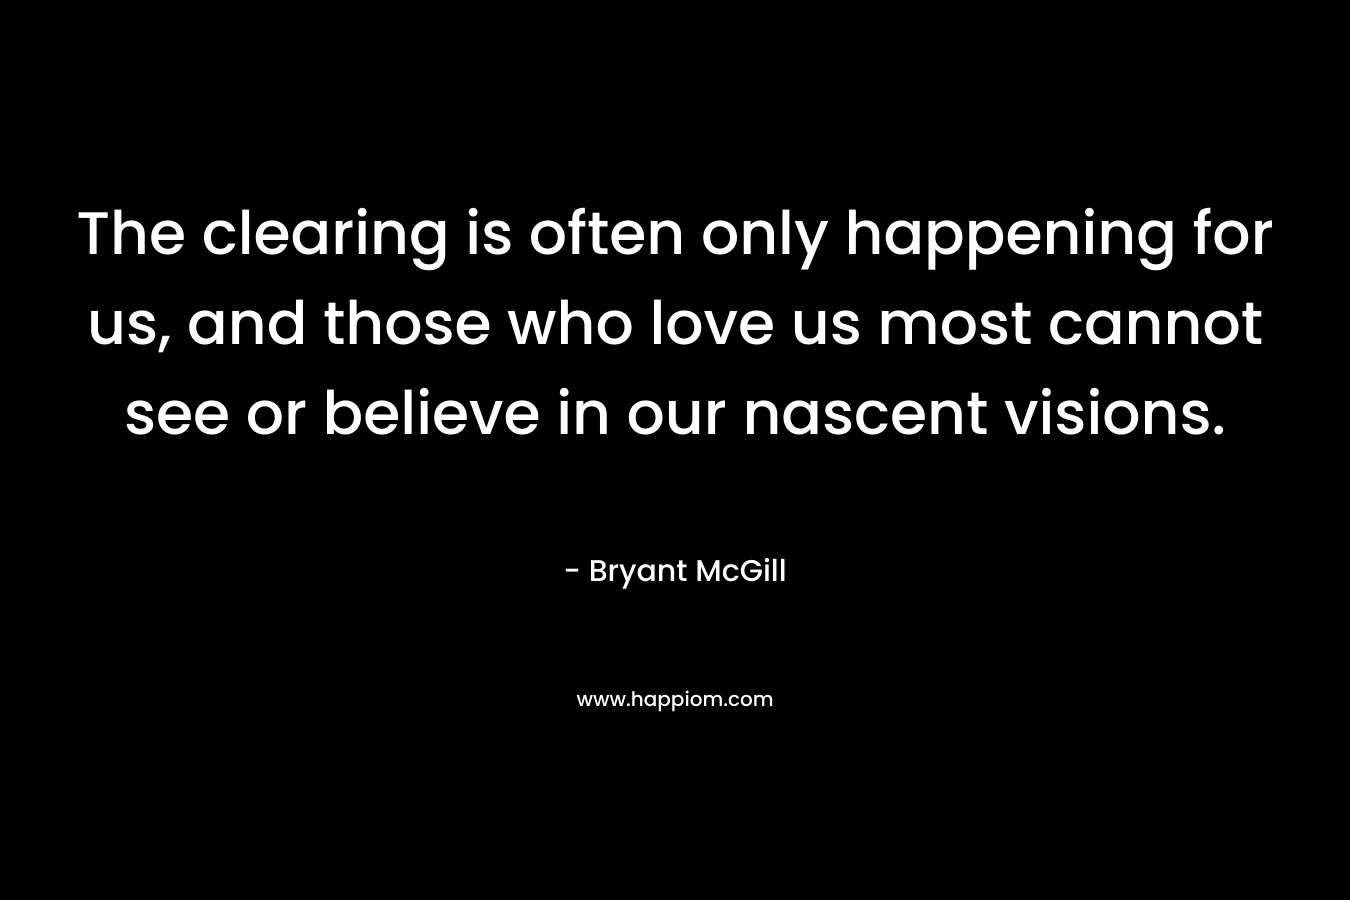 The clearing is often only happening for us, and those who love us most cannot see or believe in our nascent visions.